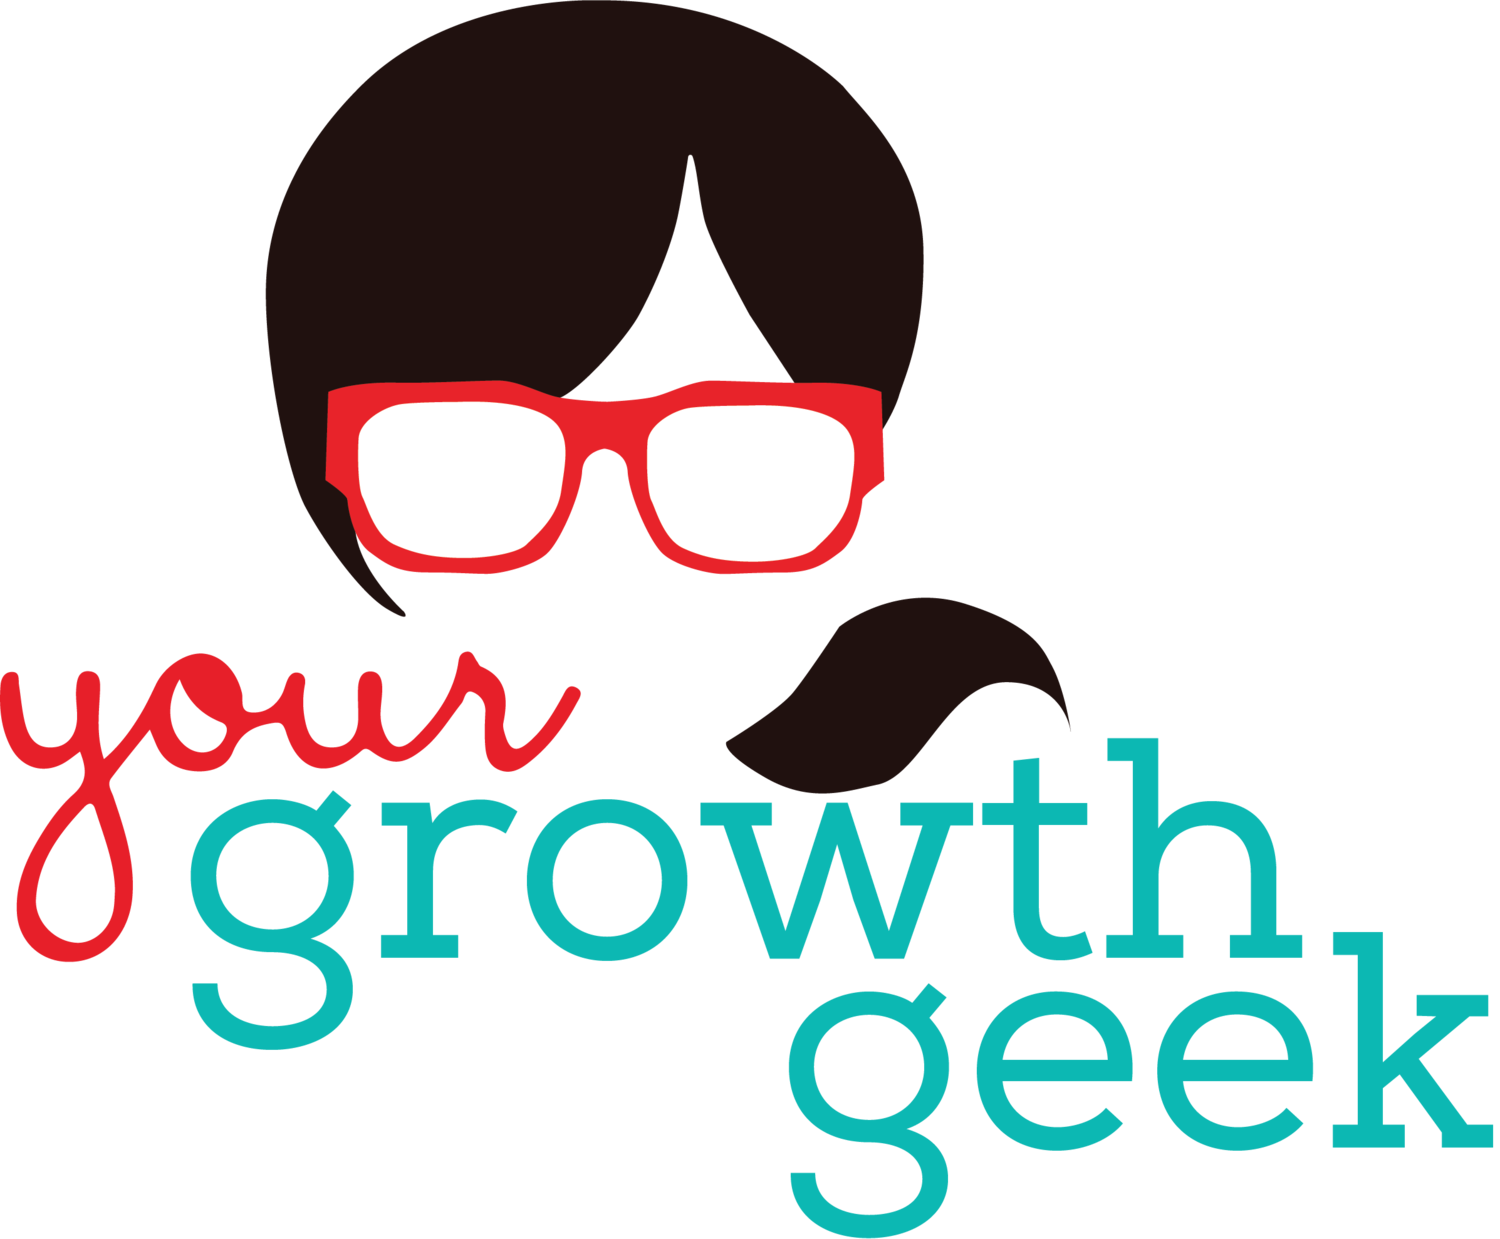 Your Growth Geek